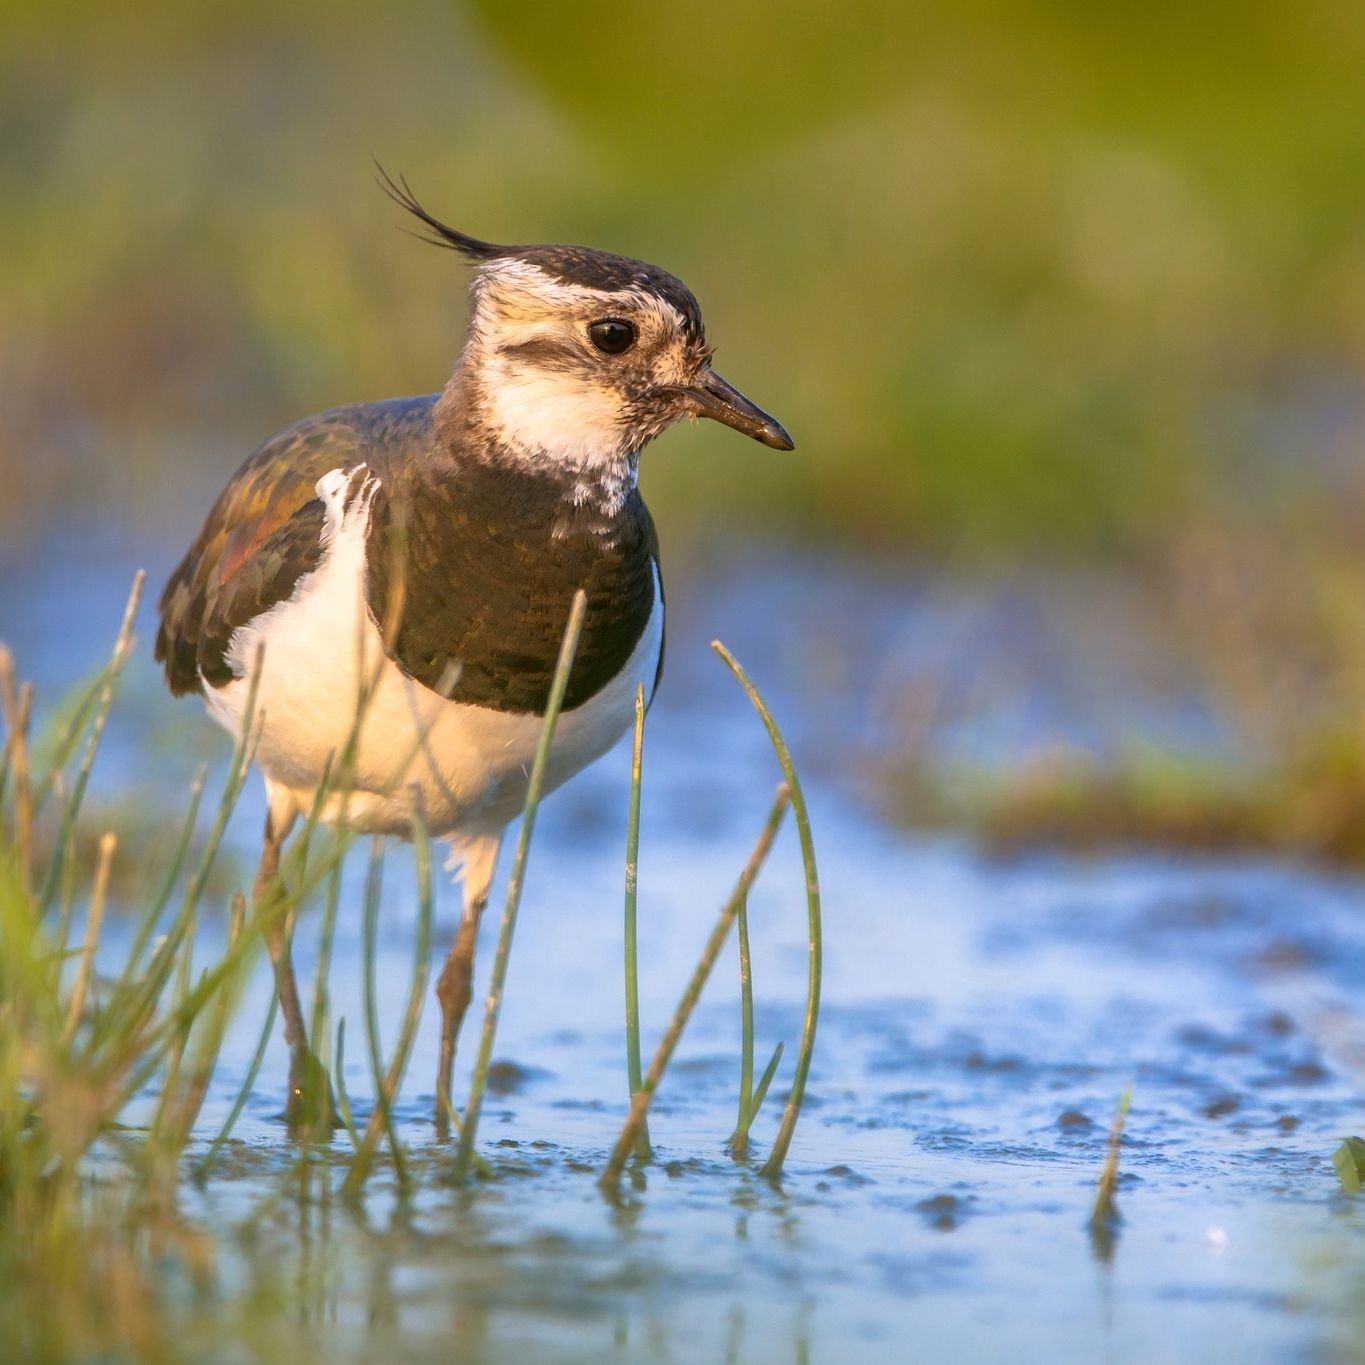 Read about our plans for lapwings and other birdlife at High Fen Wildland in Norfolk.

Visit Nattergal News. Link in bio.

#lapwings #birding #birdlife #norfolk #highfen #highfenwildland